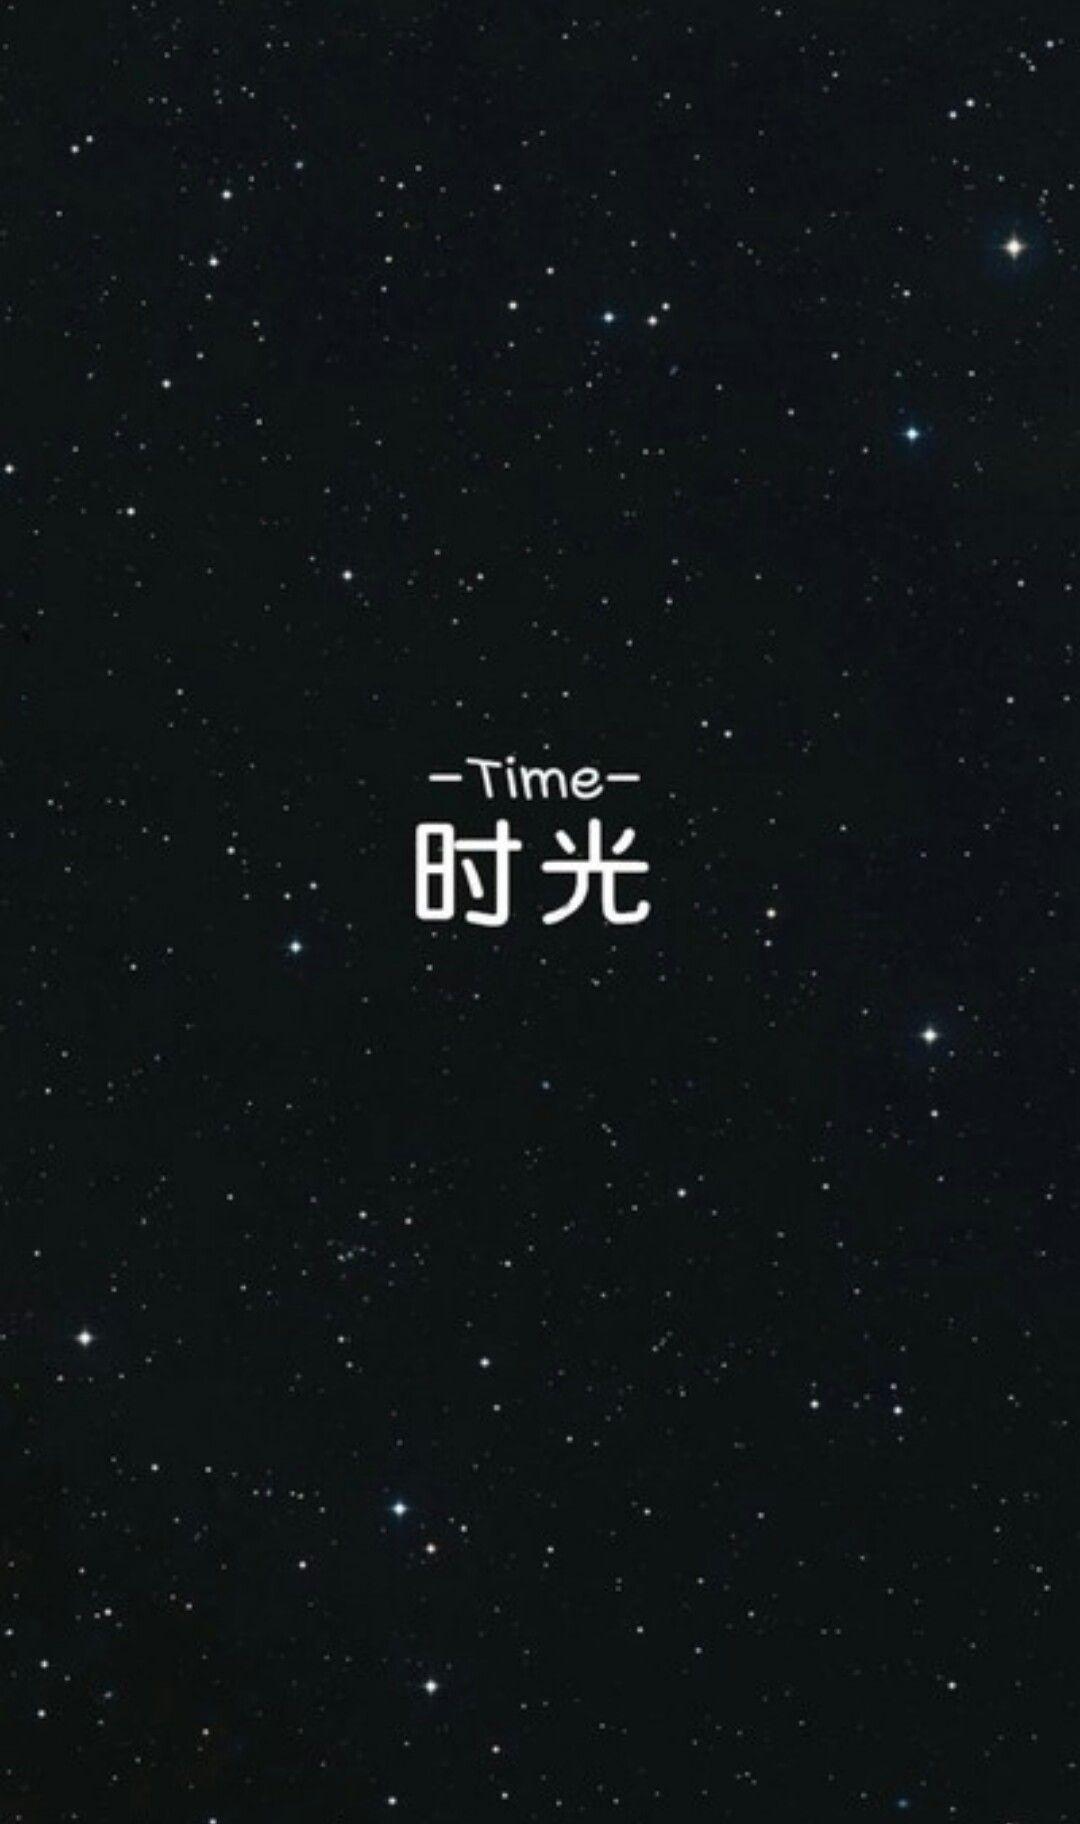 linaphat Stars Time Chinese Wallpaper. Chinese wallpaper, Words wallpaper, Black wallpaper